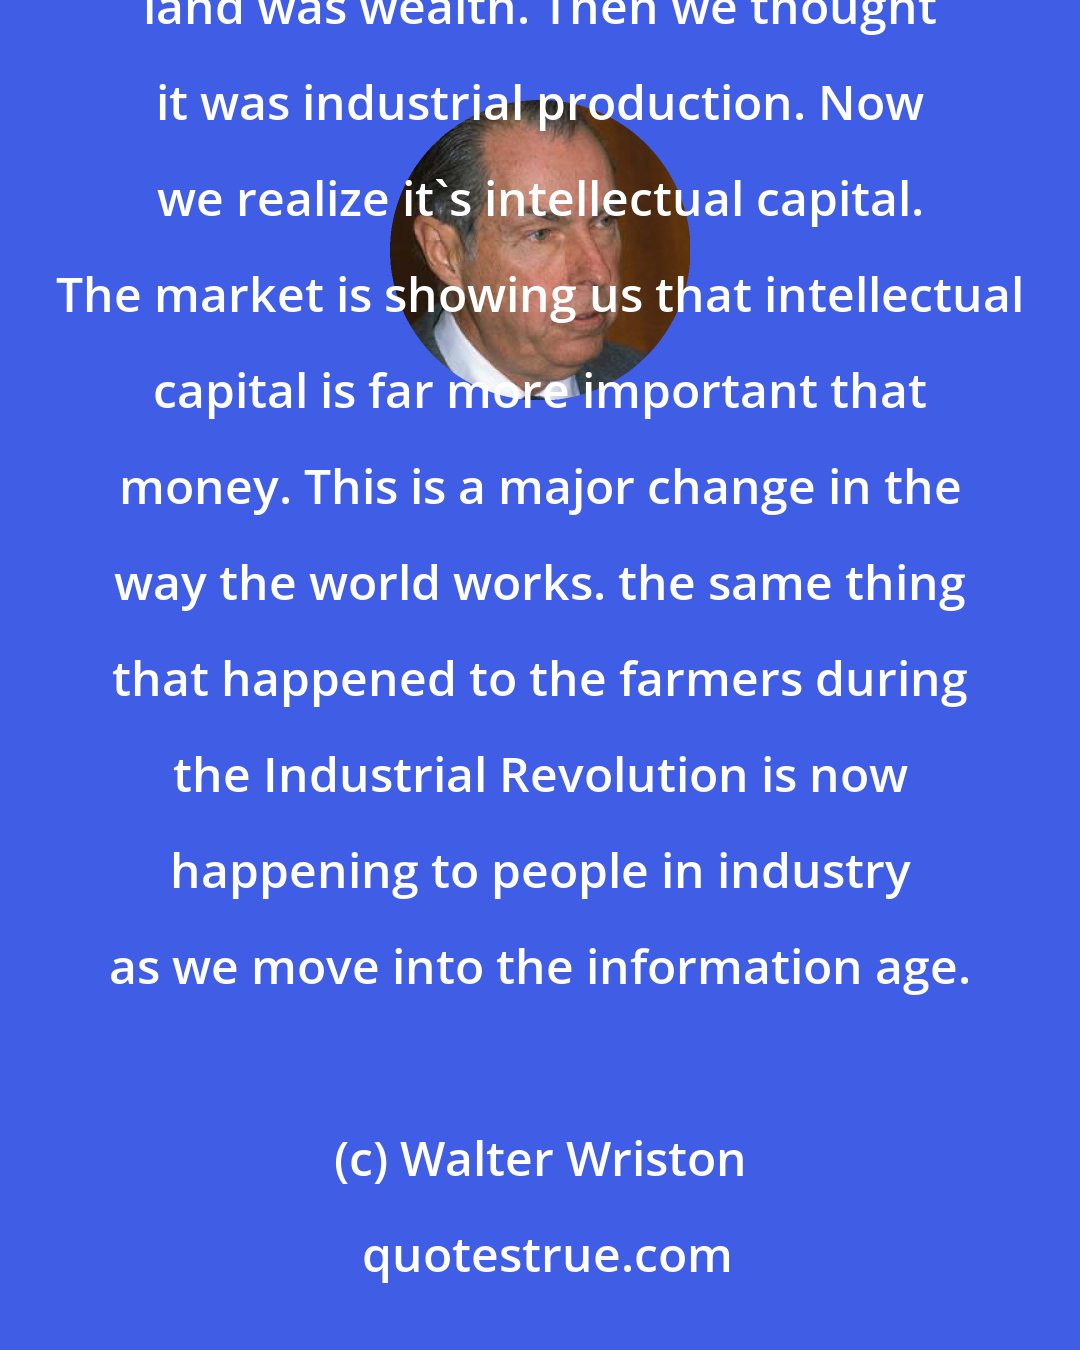 Walter Wriston: The information revolution has changed people's perception of wealth. We originally said that land was wealth. Then we thought it was industrial production. Now we realize it's intellectual capital. The market is showing us that intellectual capital is far more important that money. This is a major change in the way the world works. the same thing that happened to the farmers during the Industrial Revolution is now happening to people in industry as we move into the information age.